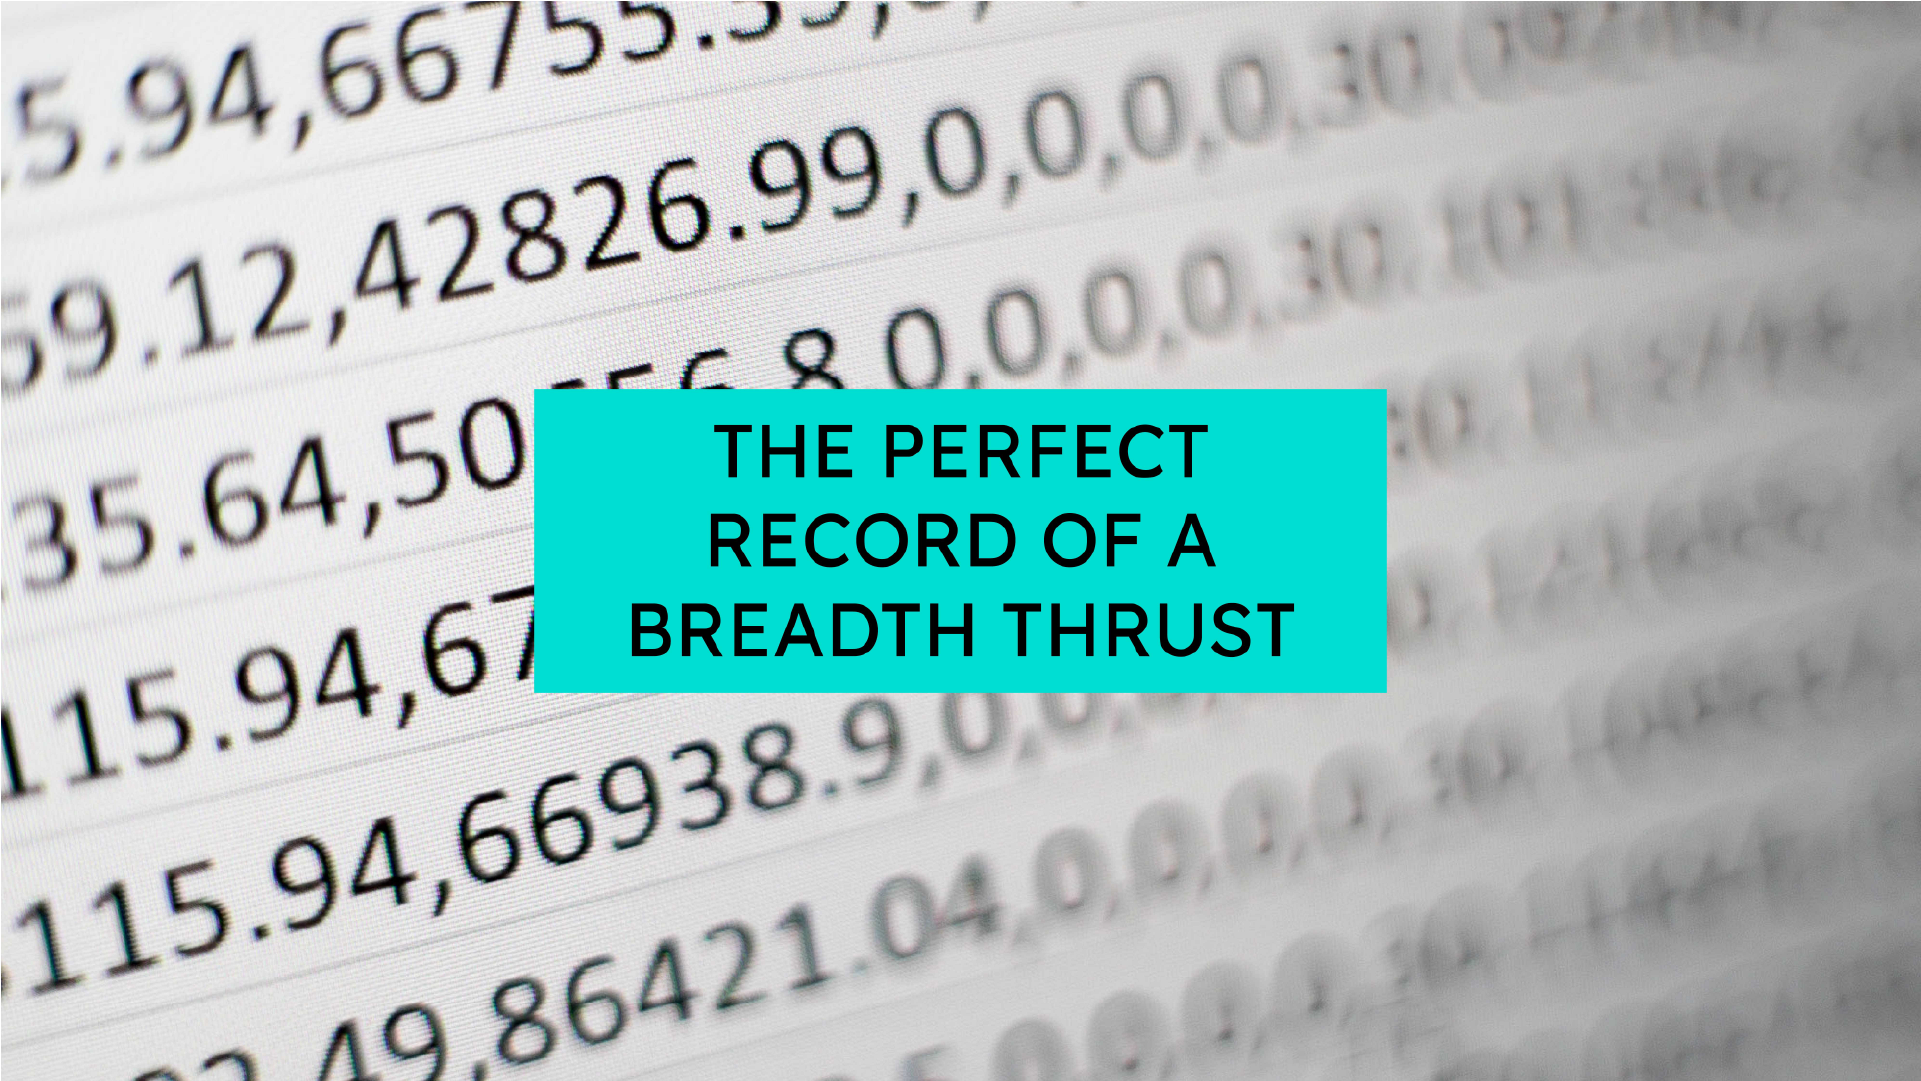 The Perfect Record of a Breadth Thrust